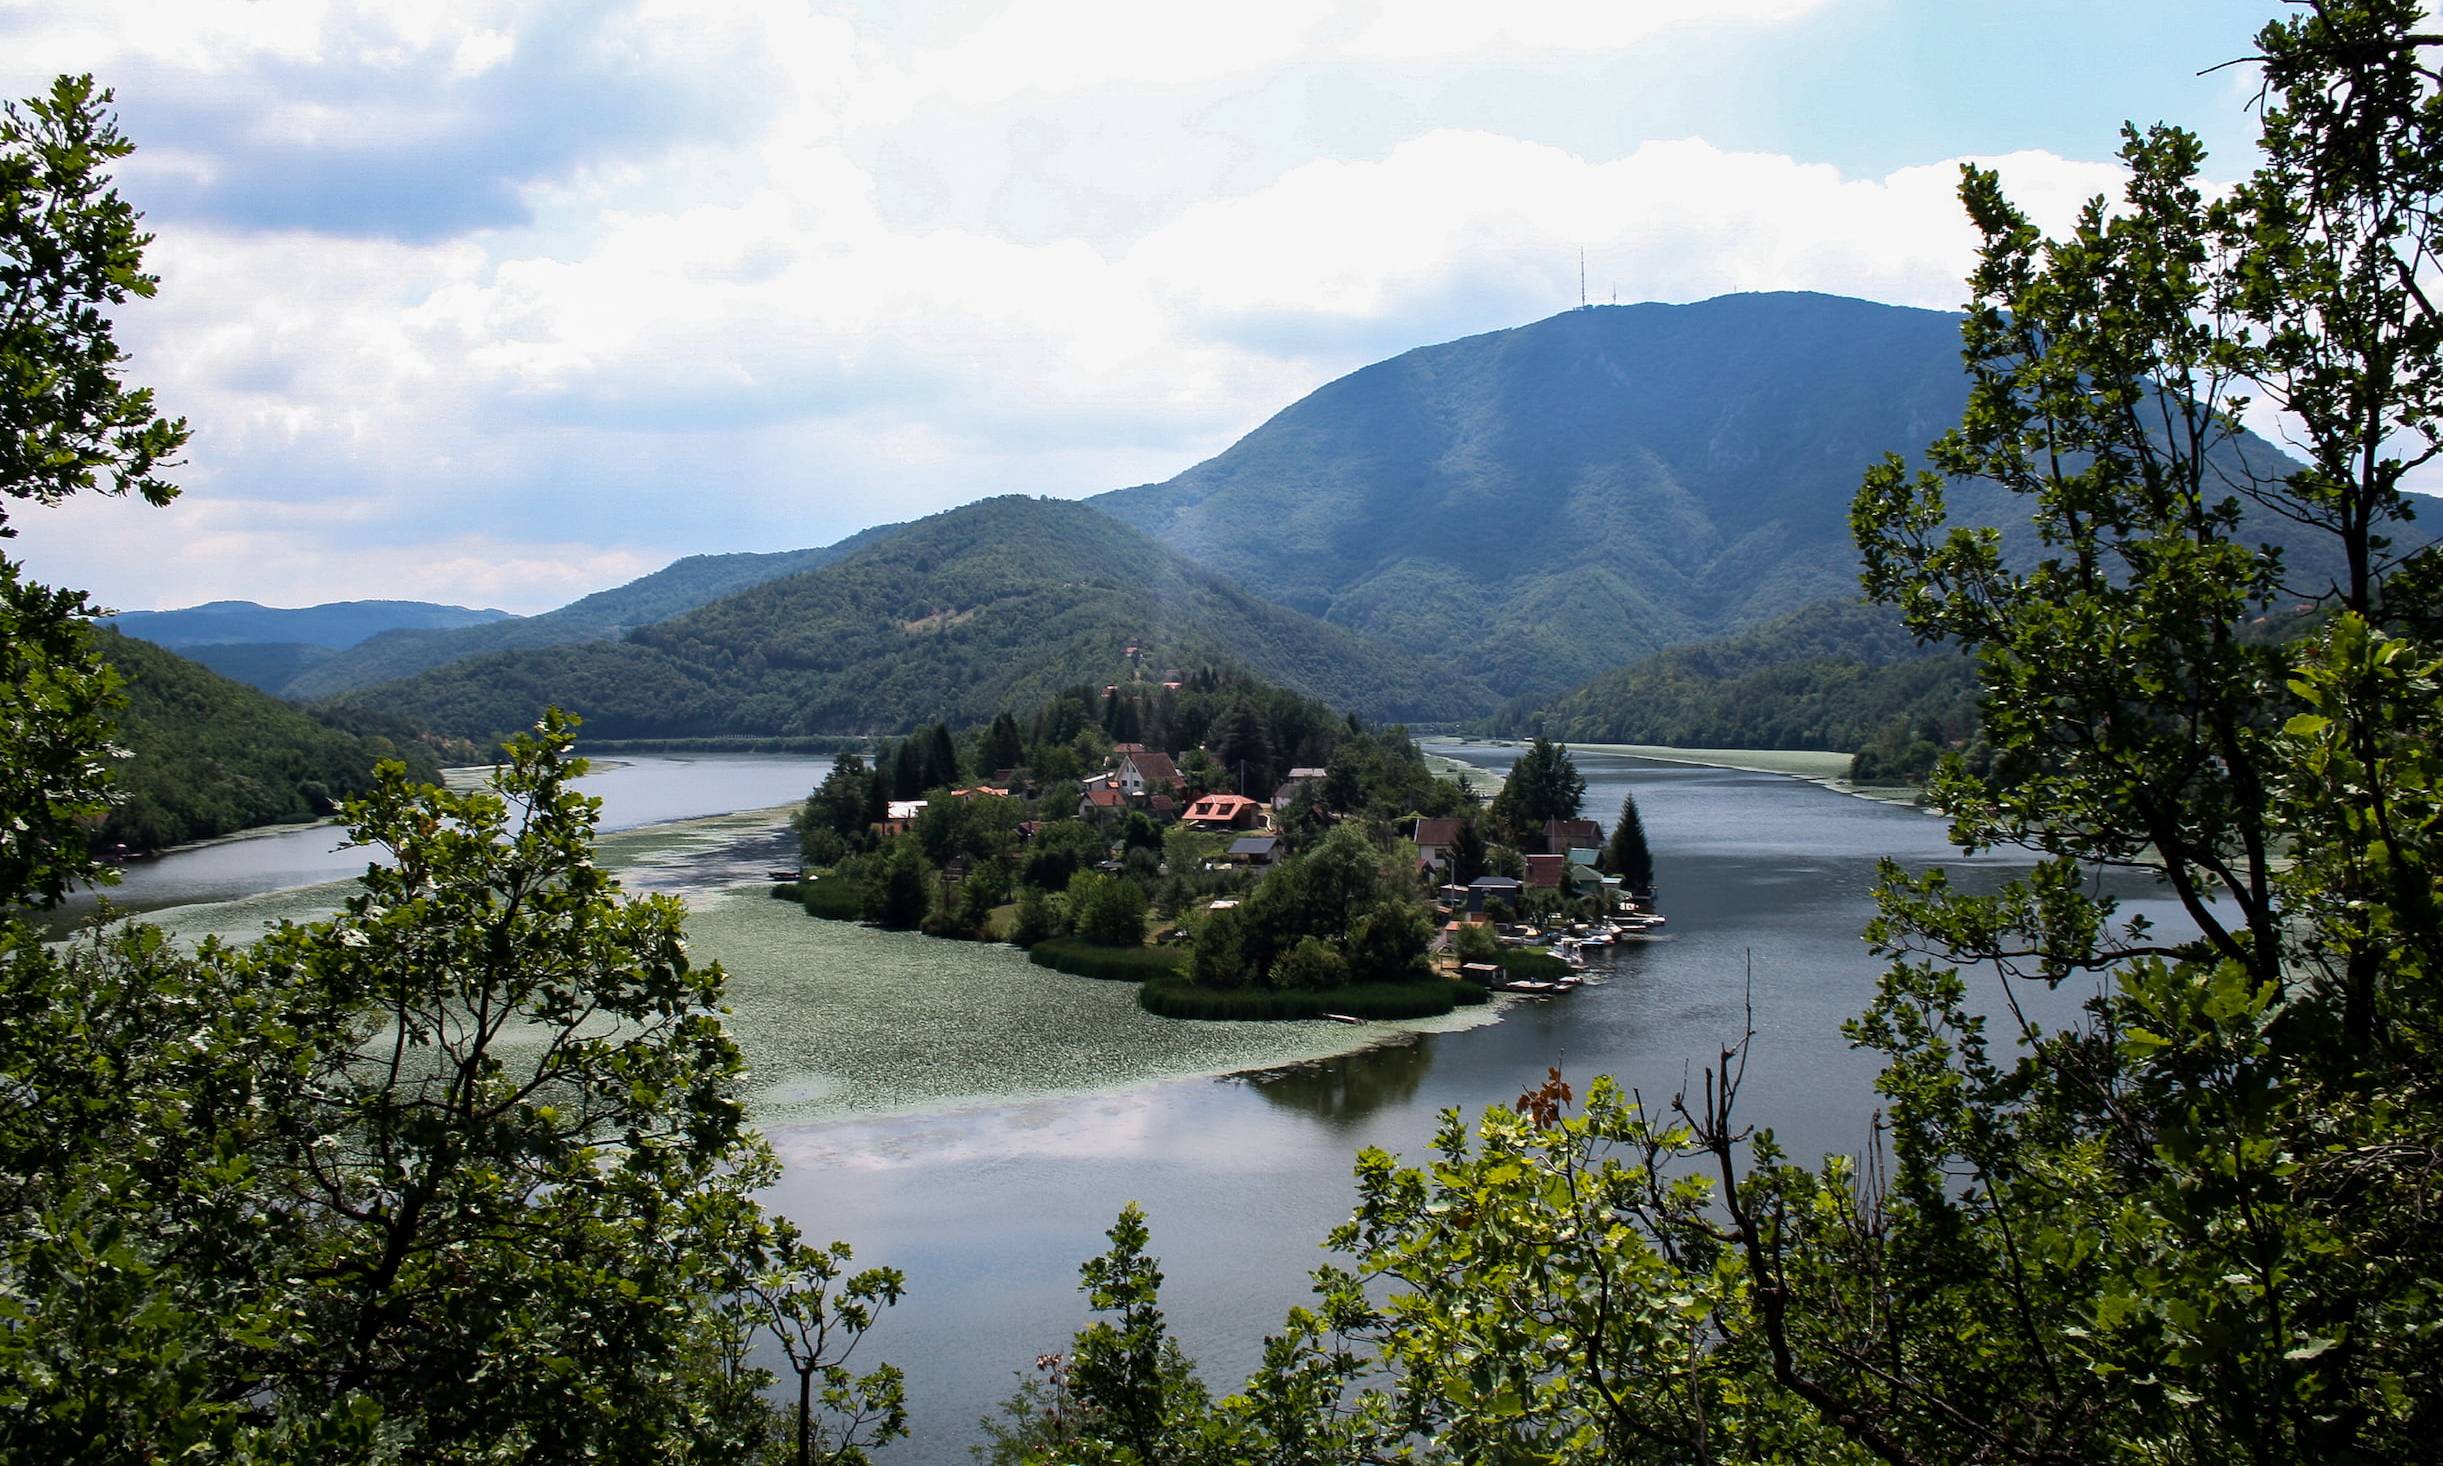 10 destinations for hiking from Belgrade - Part 2